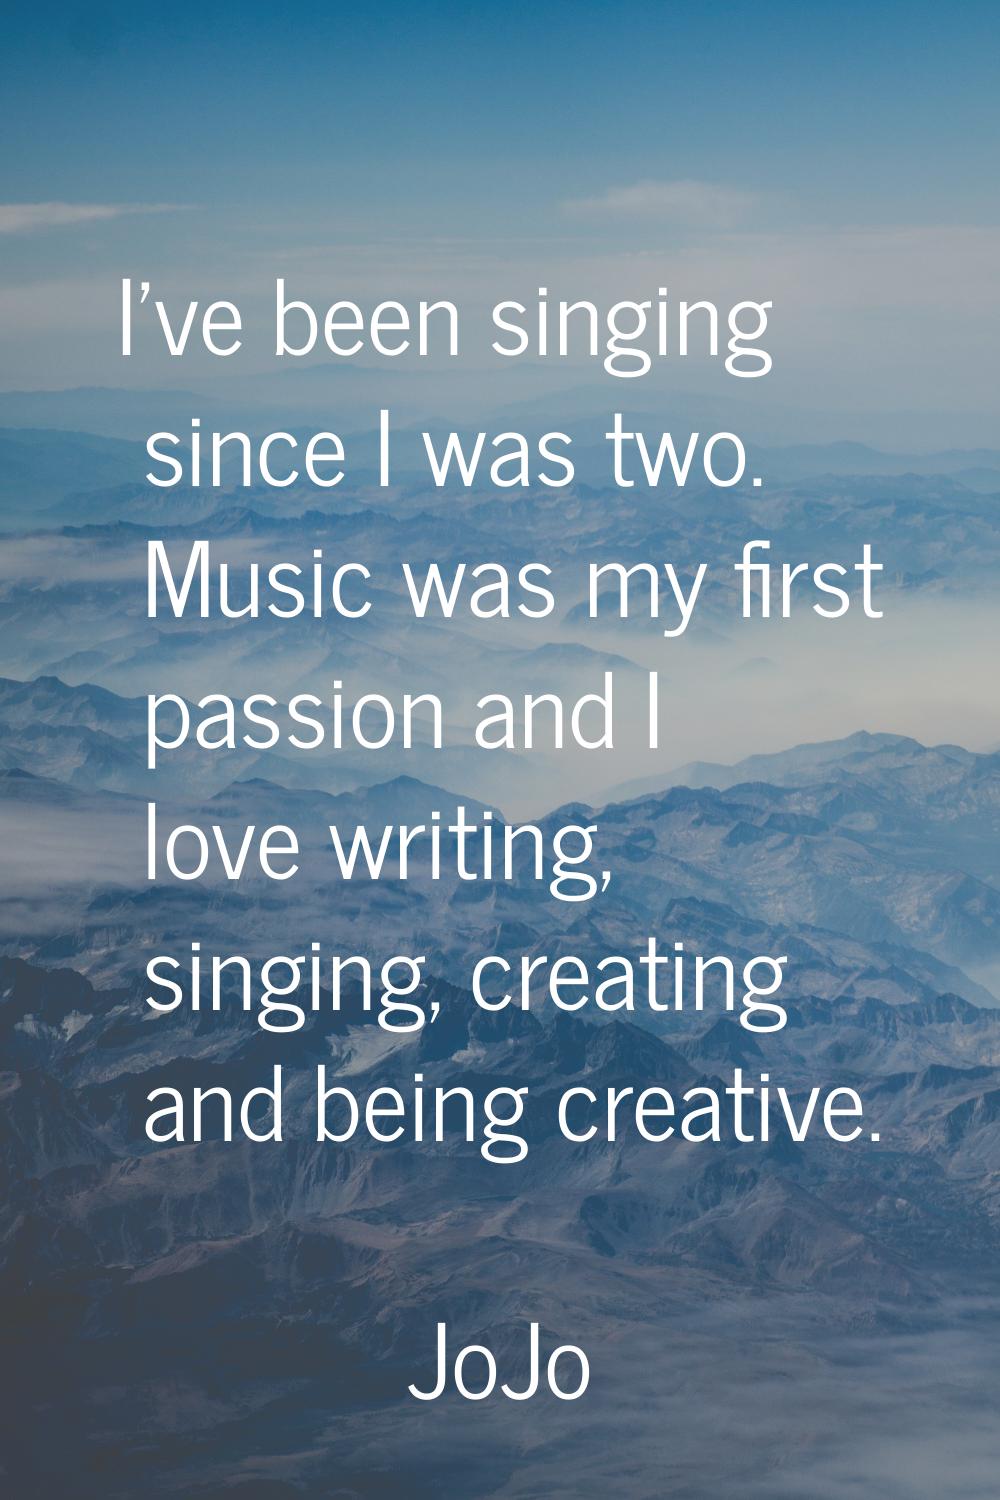 I've been singing since I was two. Music was my first passion and I love writing, singing, creating